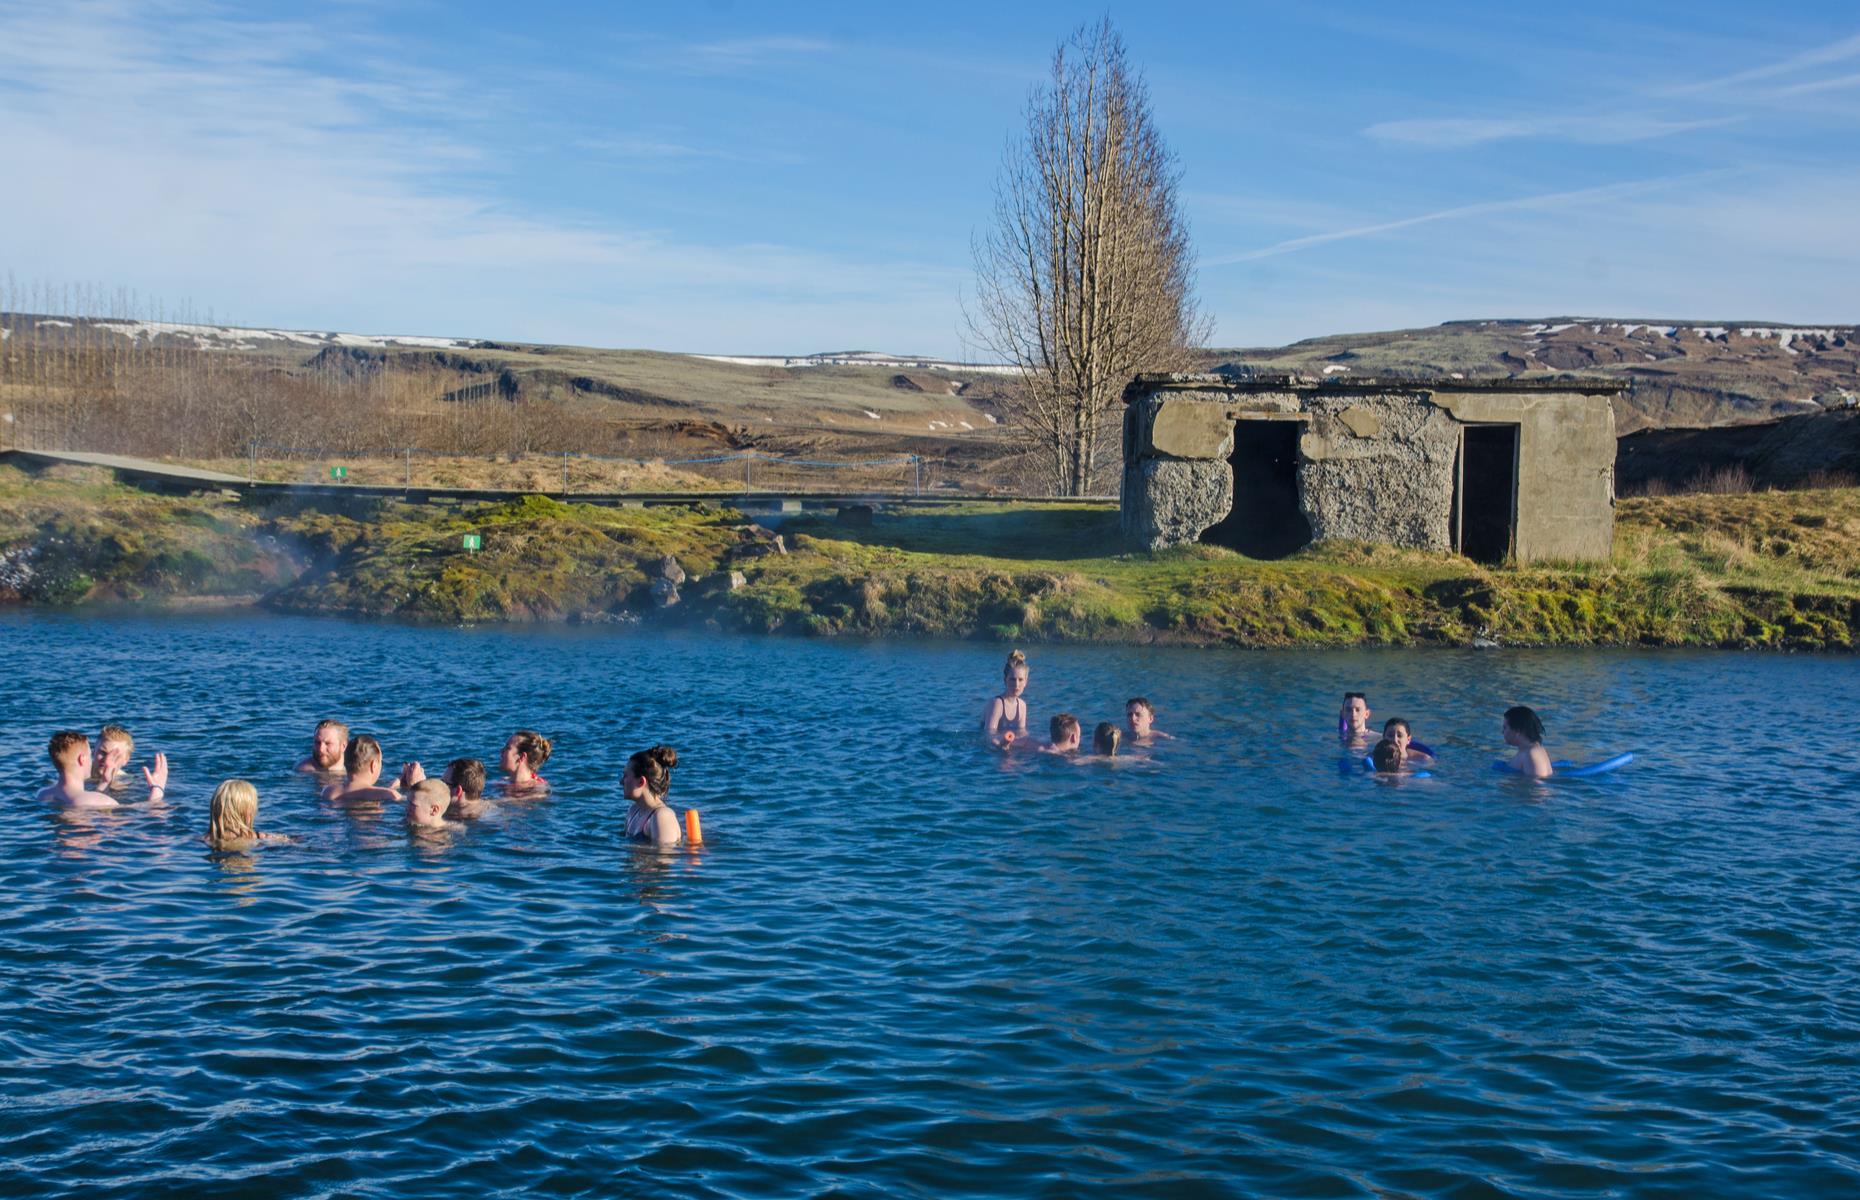 <p>The Blue Lagoon is one of Iceland’s most famous postcards, but the prohibitive price tag and popularity of the geothermal baths has led more adventurous travellers to look for alternatives like the <a href="http://secretlagoon.is/">Secret Lagoon</a>. It’s easily accessible from Reykjavík, in the small town of Flúðir (that also boasts a surprisingly fun <a href="http://fridheimar.is/en">tomato farm</a>).</p>  <p>Built as a public swimming pool in 1947, the lagoon is heated by bubbling hot springs nearby which you can wander around – just don’t fall in as temperatures exceed 100°C (212°F).</p>